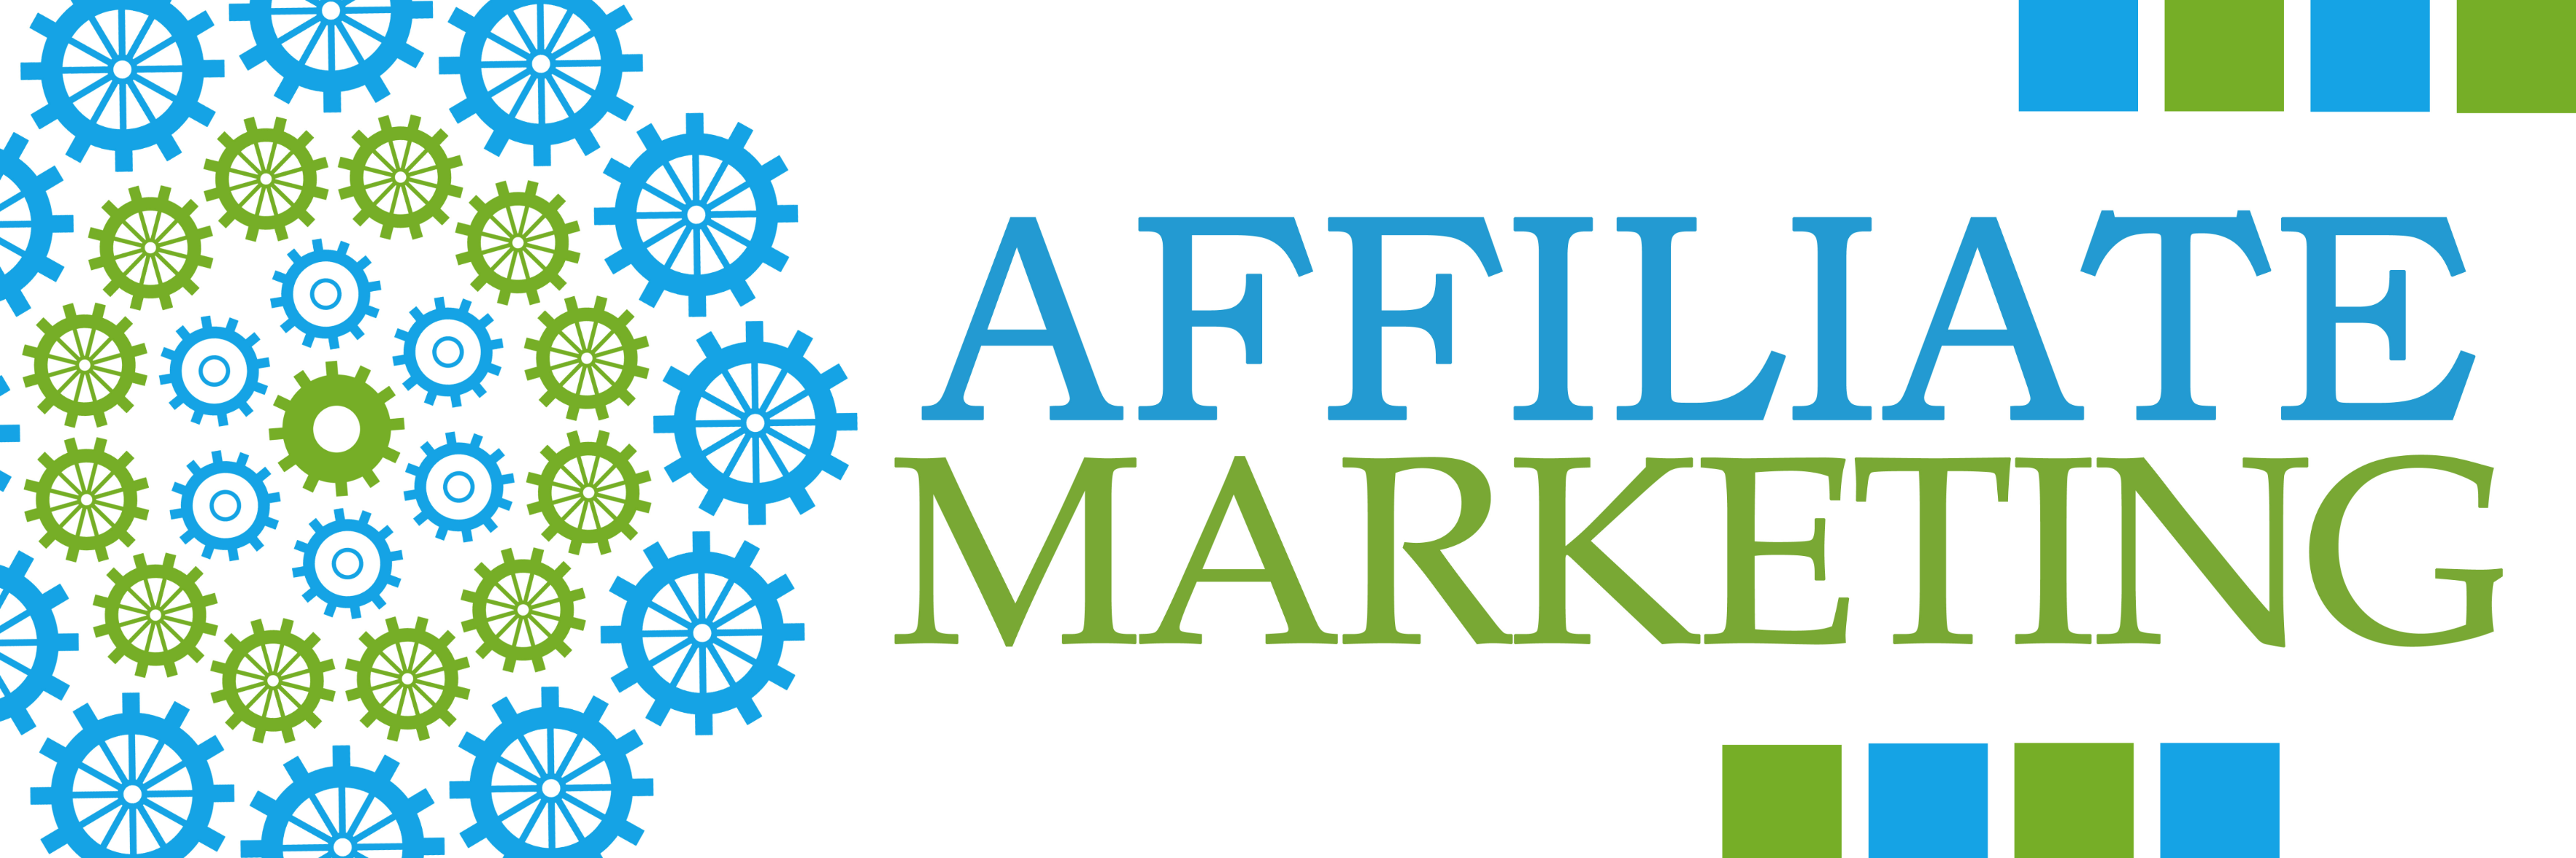 Get Started In Affilate Marketing